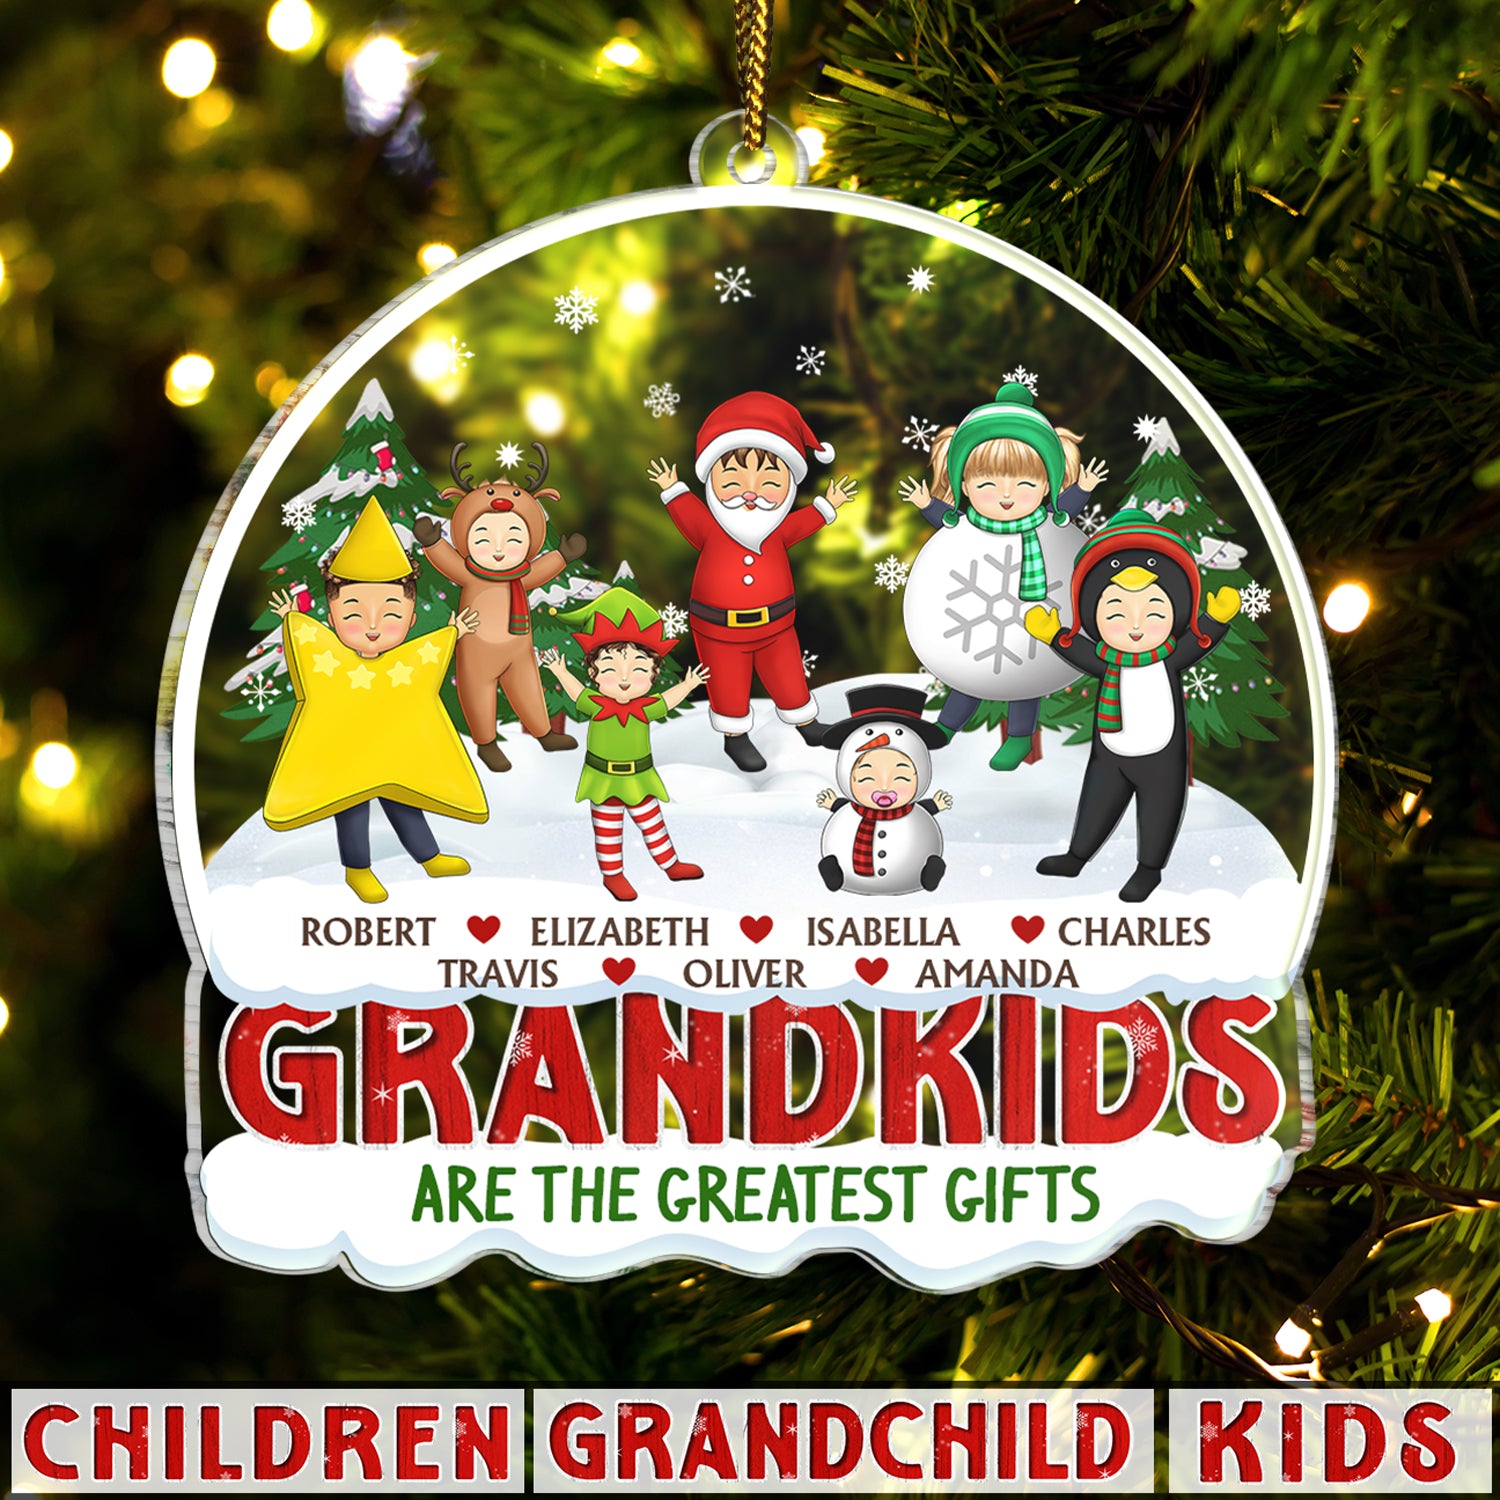 Grandkids Are The Greatest Gifts - Christmas Gift For Grandpa, Grandma, Grandparents - Personalized Custom Shaped Acrylic Ornament